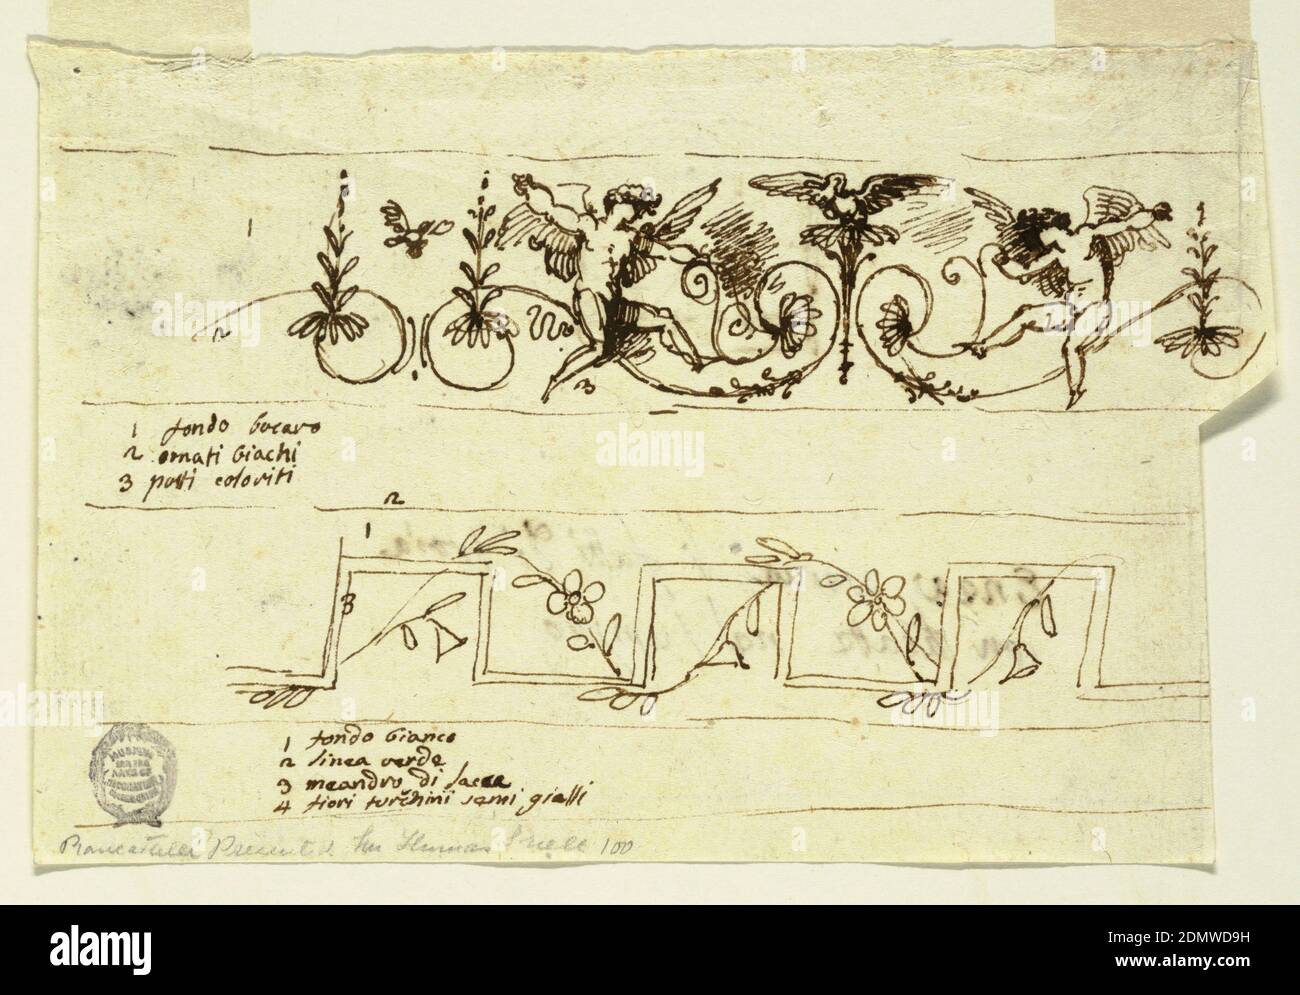 Two Friezes, Felice Giani, Italian, 1758–1823, Pen and bistre on paper, Horizontal rectangle. Right edge above: windged putto sit upon scrolls symmetrically arranged on stem with blossom, and swan in the internval. From spirals rises stem with leaves. Above interval, bird. Figures 1 to 3, below, at left: '1 fondo bocaro/ 2 ornati bianchi/ 3 putti coloriti.' Below: a rectularly broken band entwined with waved flower-stem. Figures 1 to 3: '1 fondo bianco/ 2 linea verde/ [framing lines above and below] 3 meandro di Sacca/ 4 fiori tiuchini semi gialli.' Verso: section of room with vaulted ceiling Stock Photo